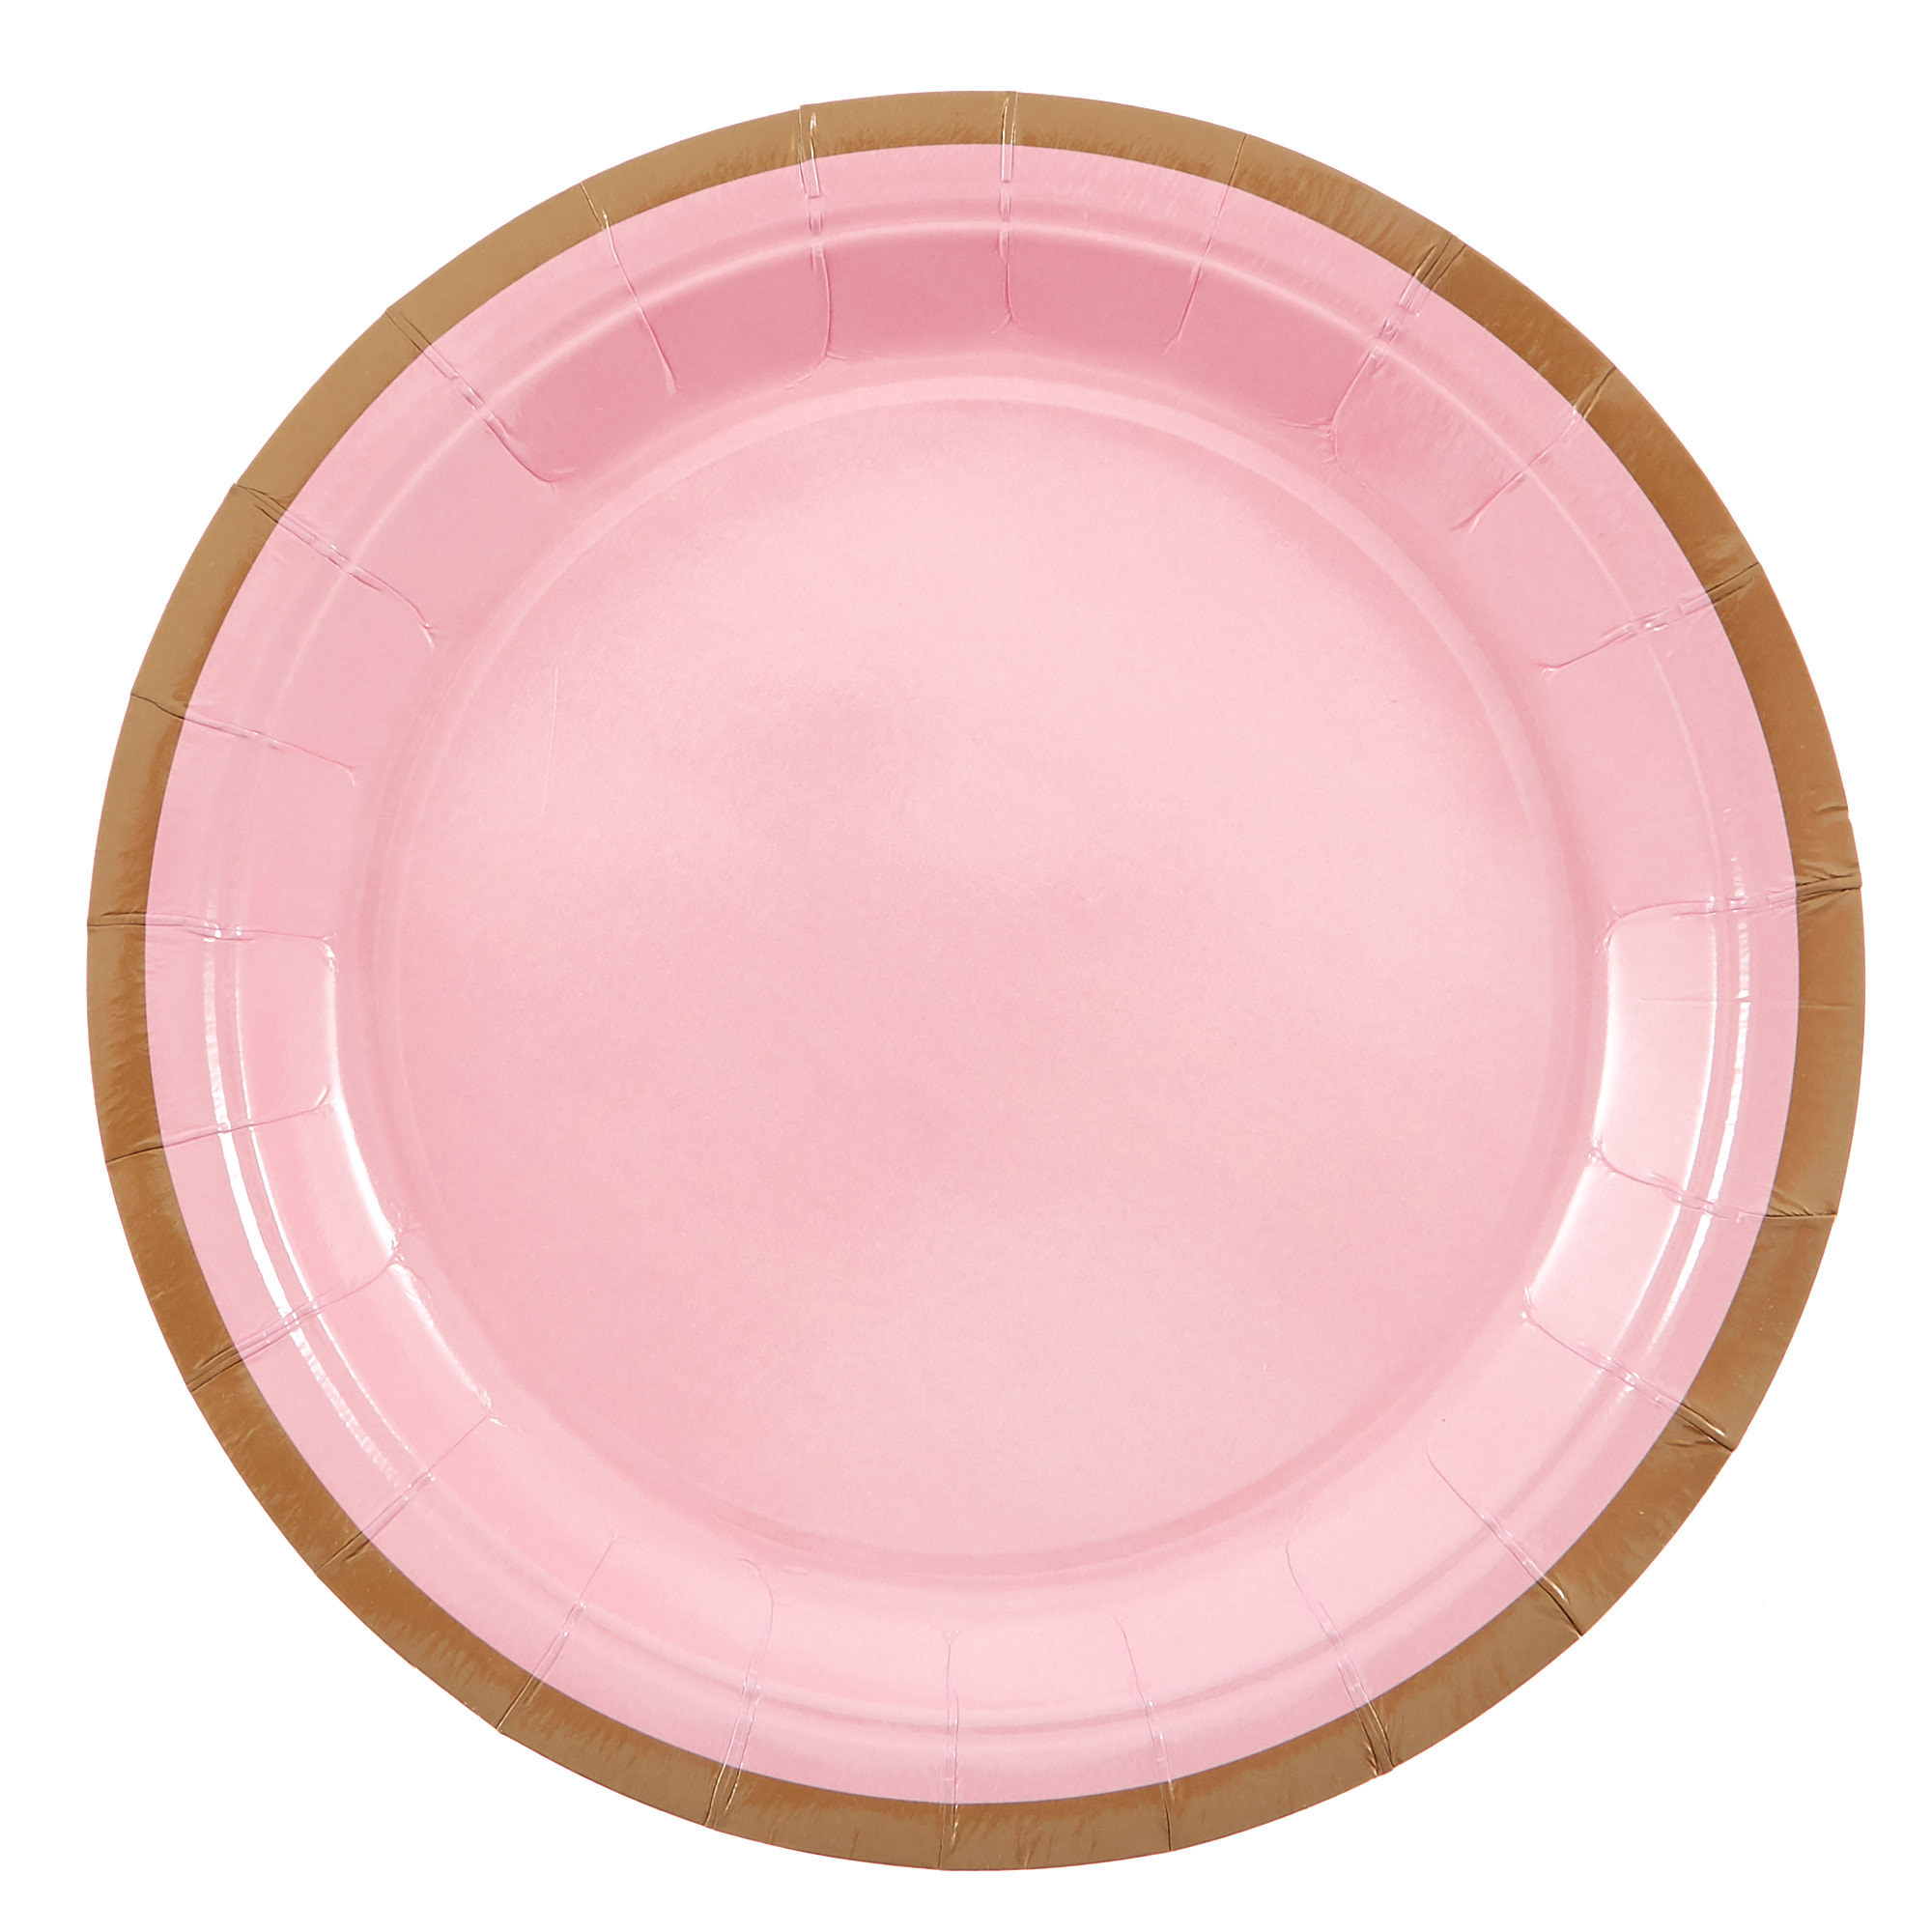 Pink & Gold Party Tableware & Decorations Bundle - 8 Guests